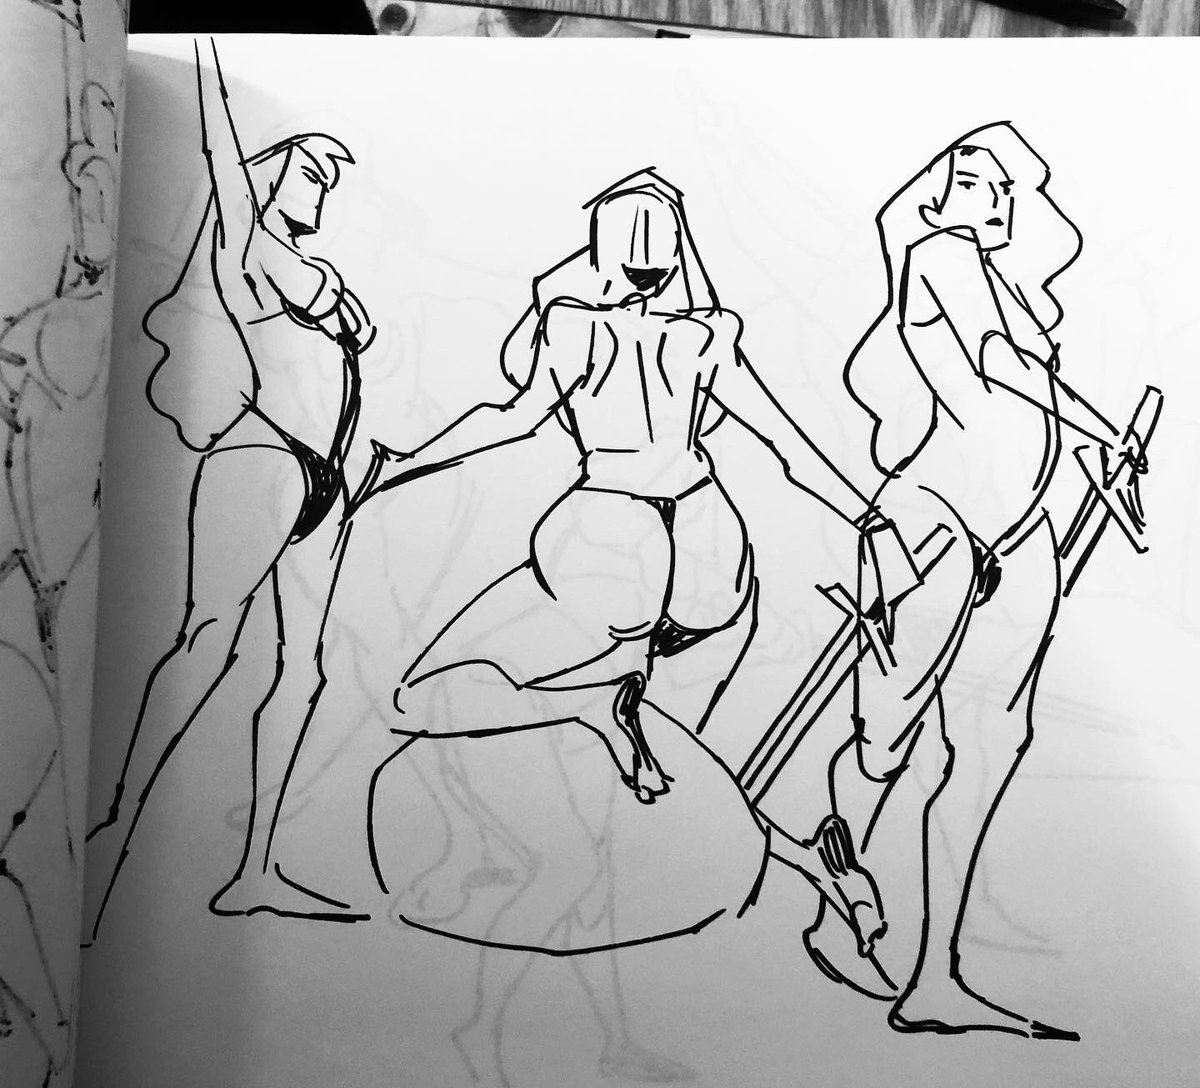 Figure drawing tonight ^^ forgot my pens at home so I used the office sharpie & ball point ...definitely prefer the sharpie haha 